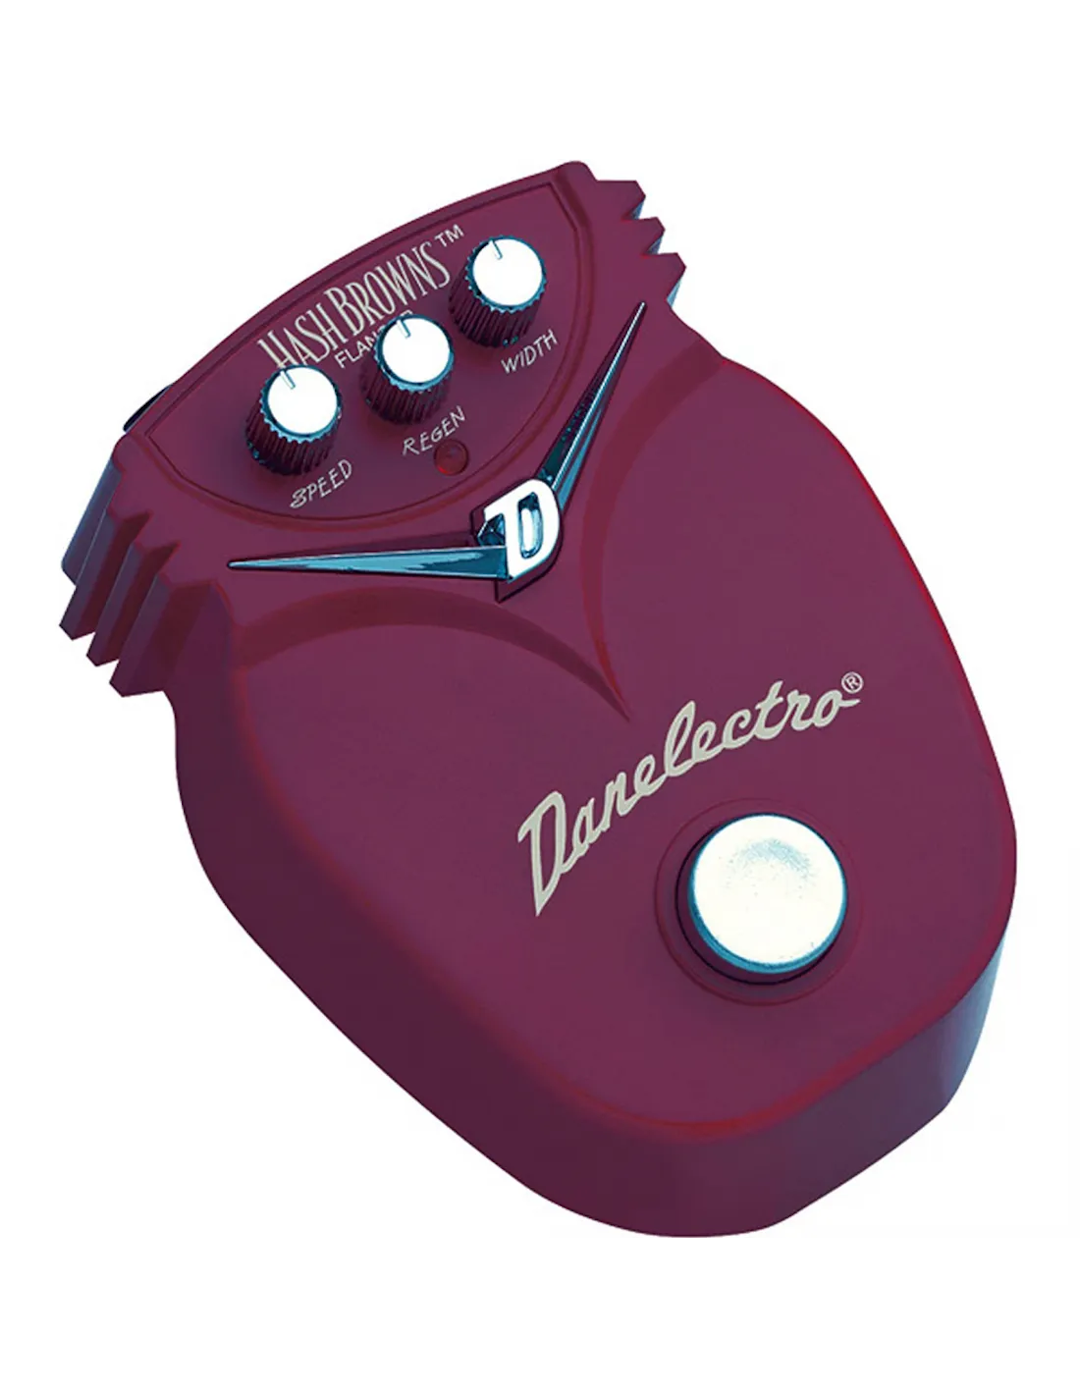 Hash Browns Flanger Guitar Pedal By Danelectro